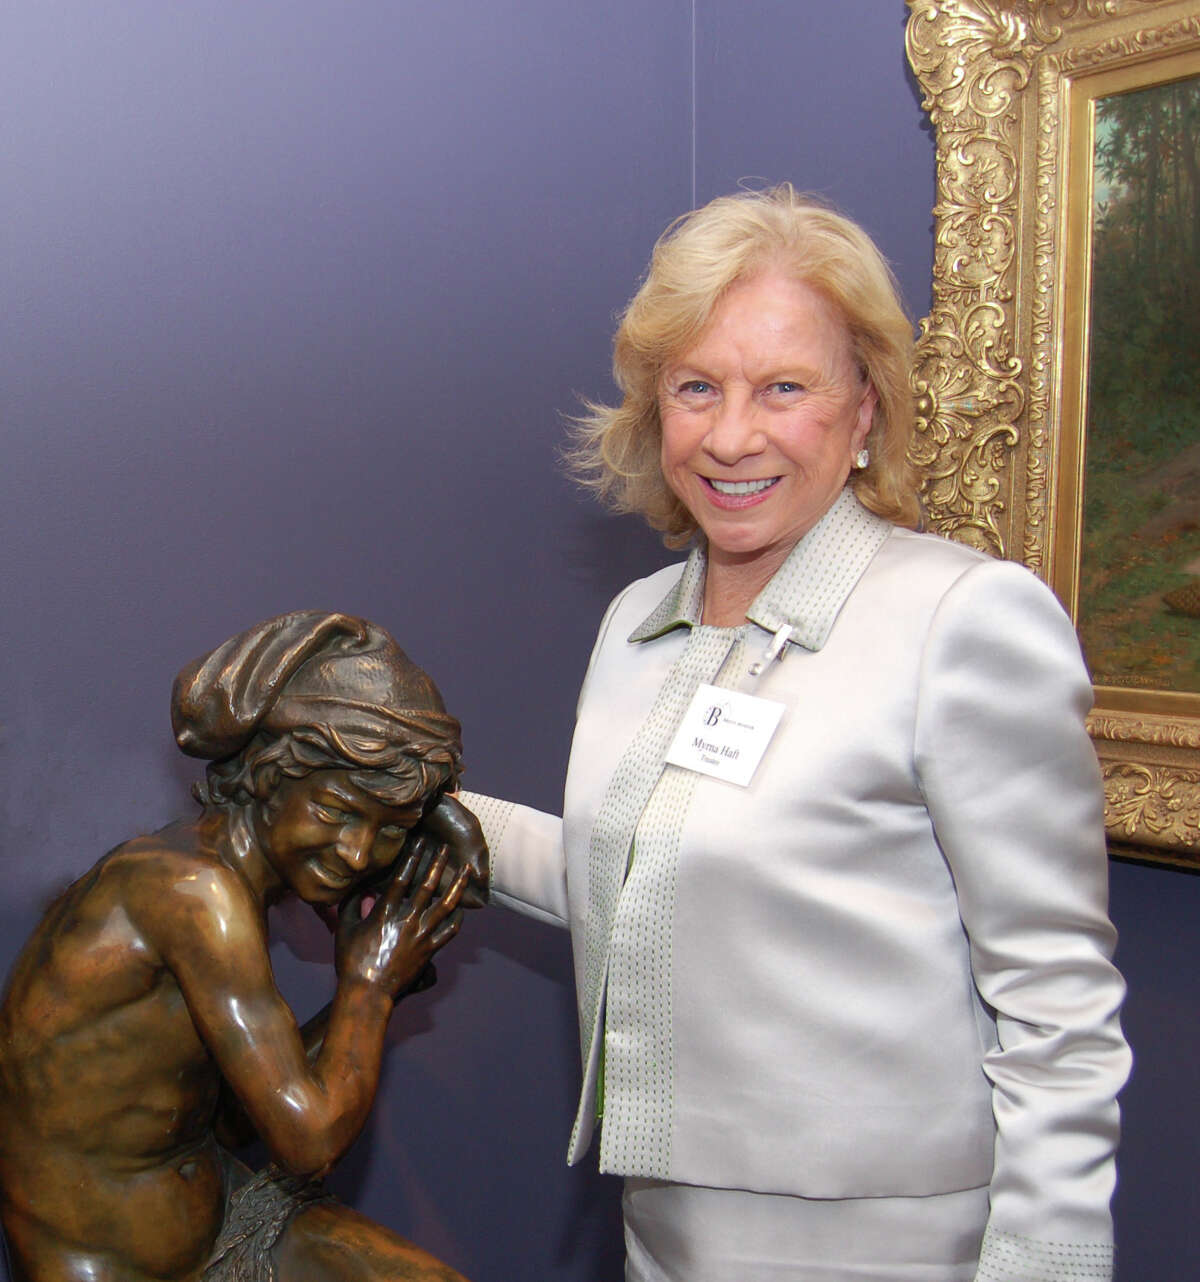 Jean-Baptiste Carpeaux's "Jeune Pecheur a la Coquille (Neapolitan Fisherboy)," was a gift to the Bruce Museum from Greenwich resident Myrna Haft who is seen here with the bronze sculpture.